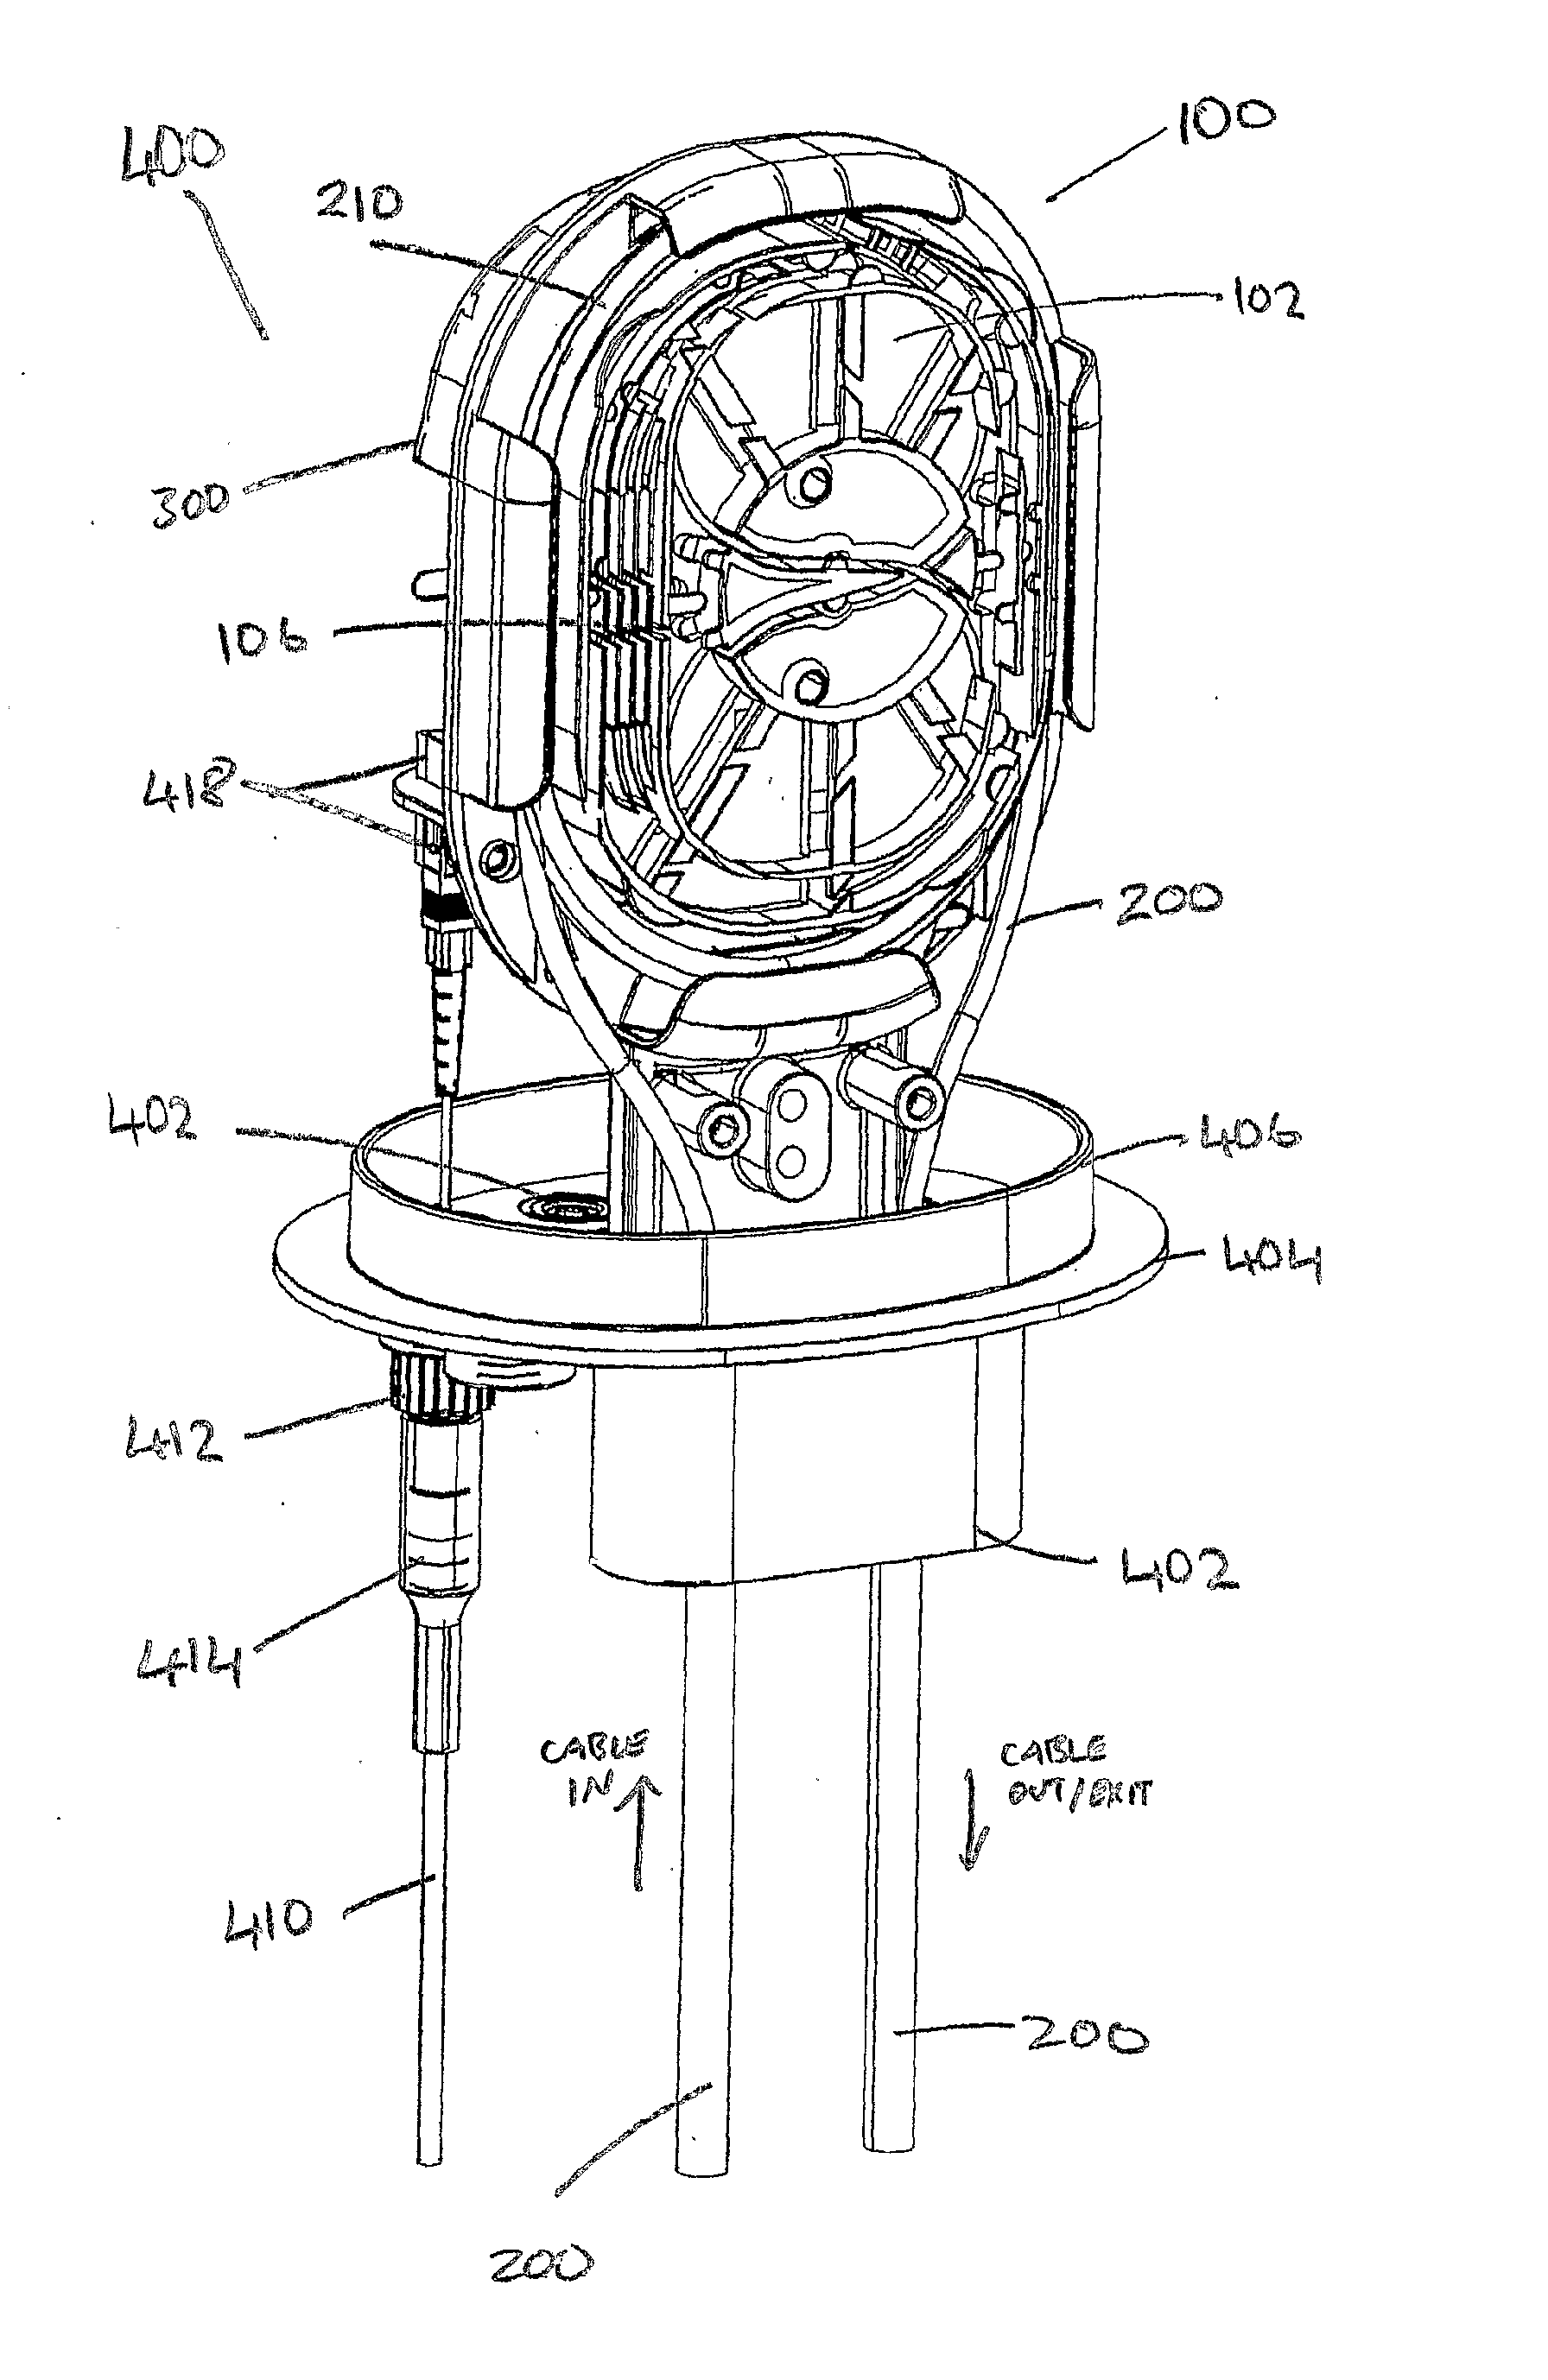 Cable loop device for optical systems